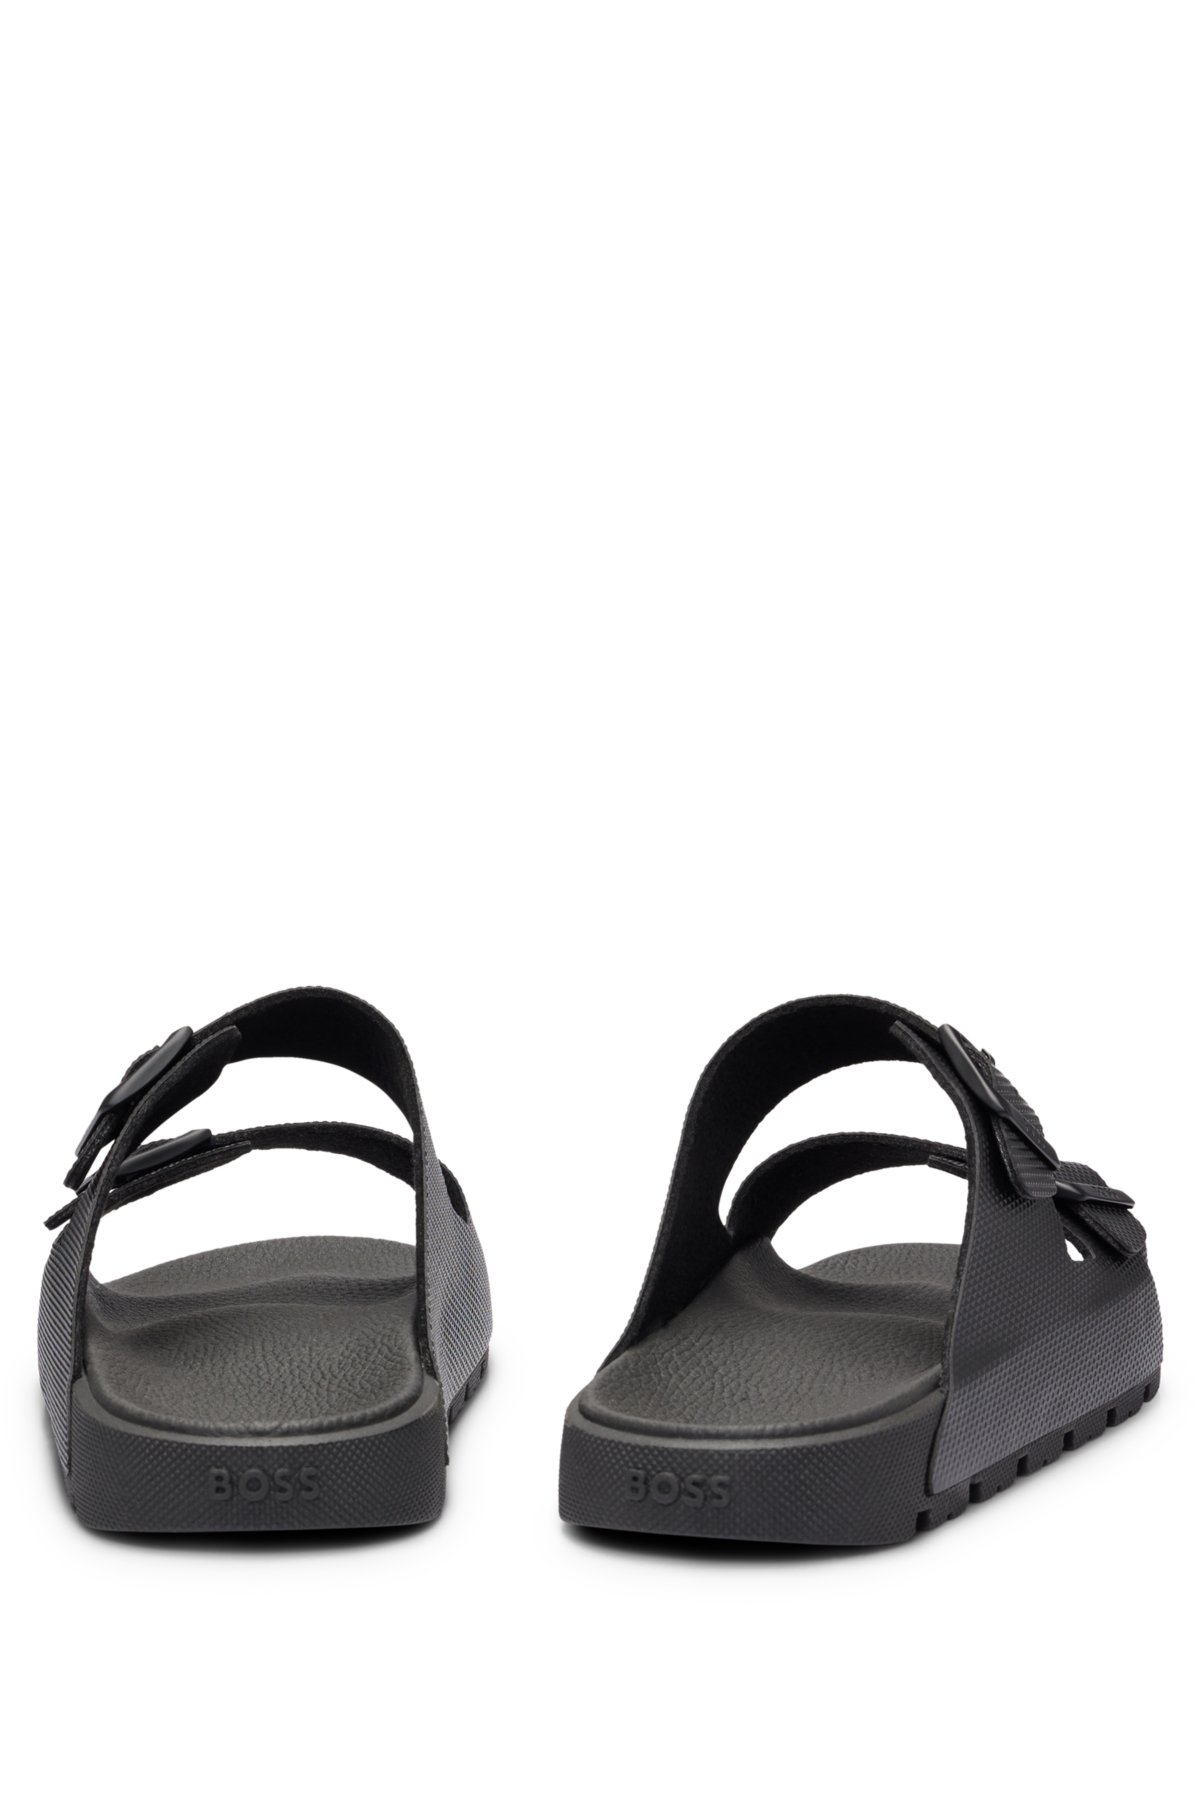 All-gender twin-strap sandals with structured uppers, Black